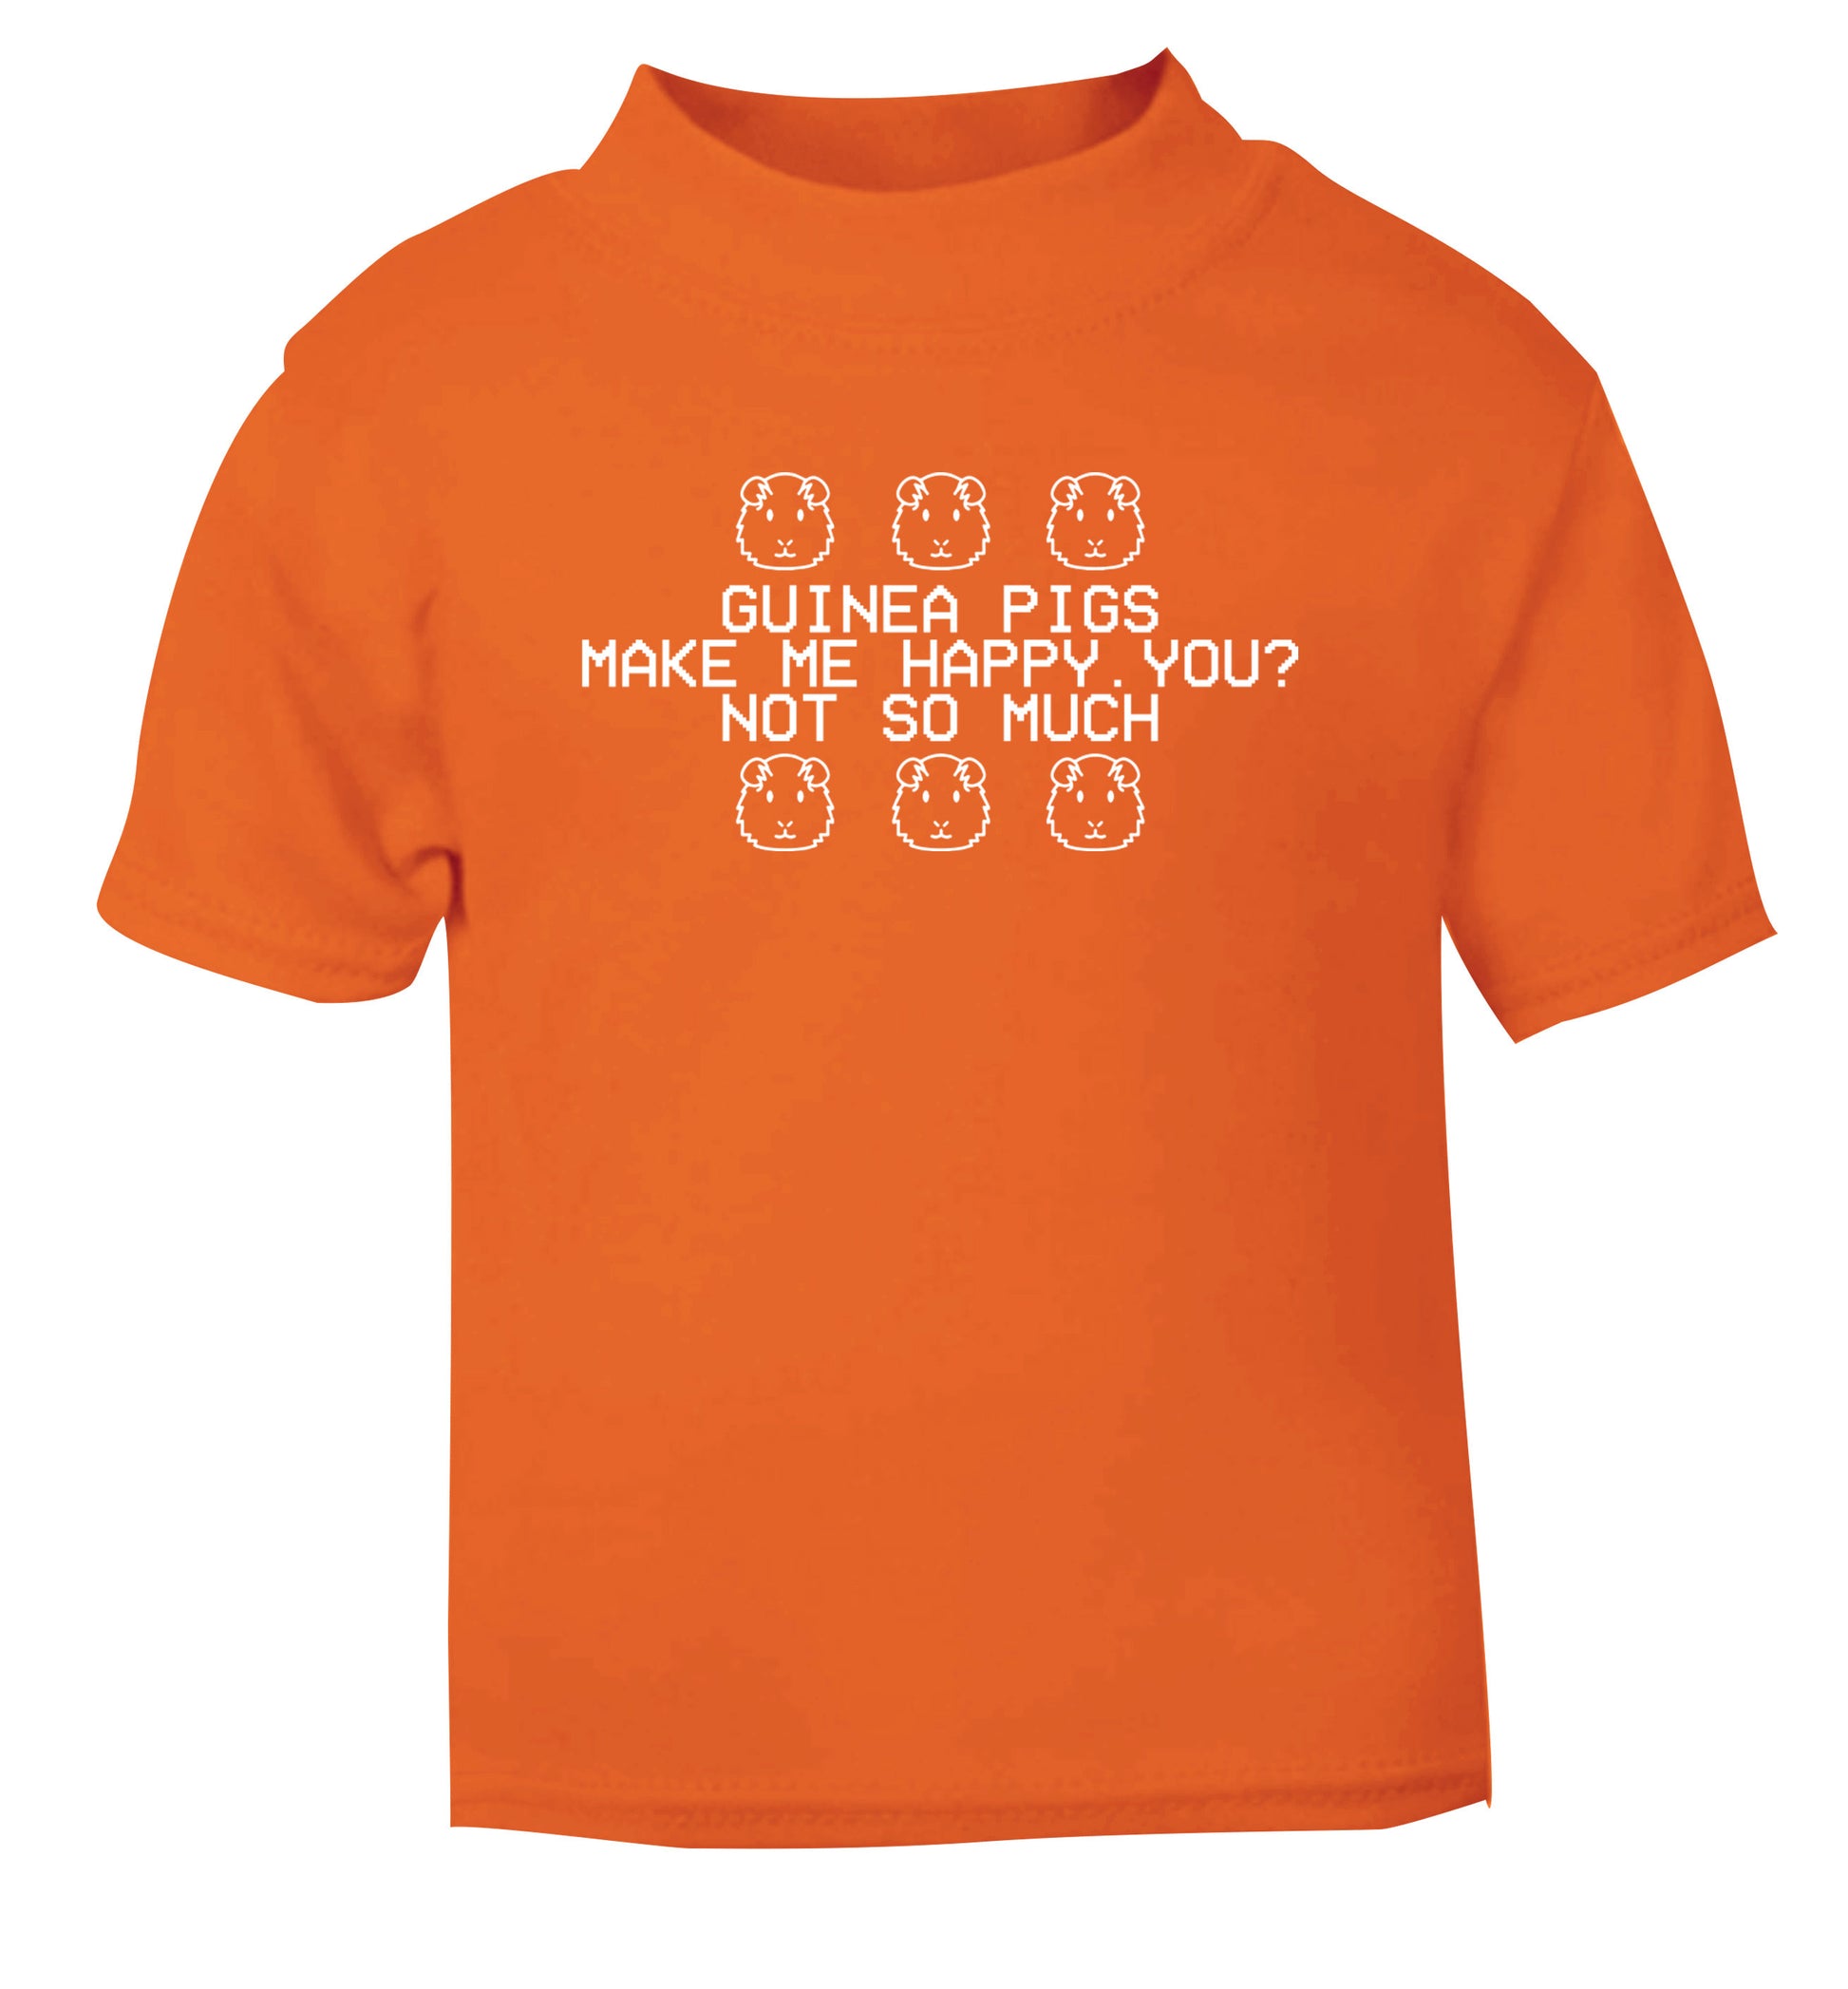 Guinea pigs make me happy, you not so much orange Baby Toddler Tshirt 2 Years